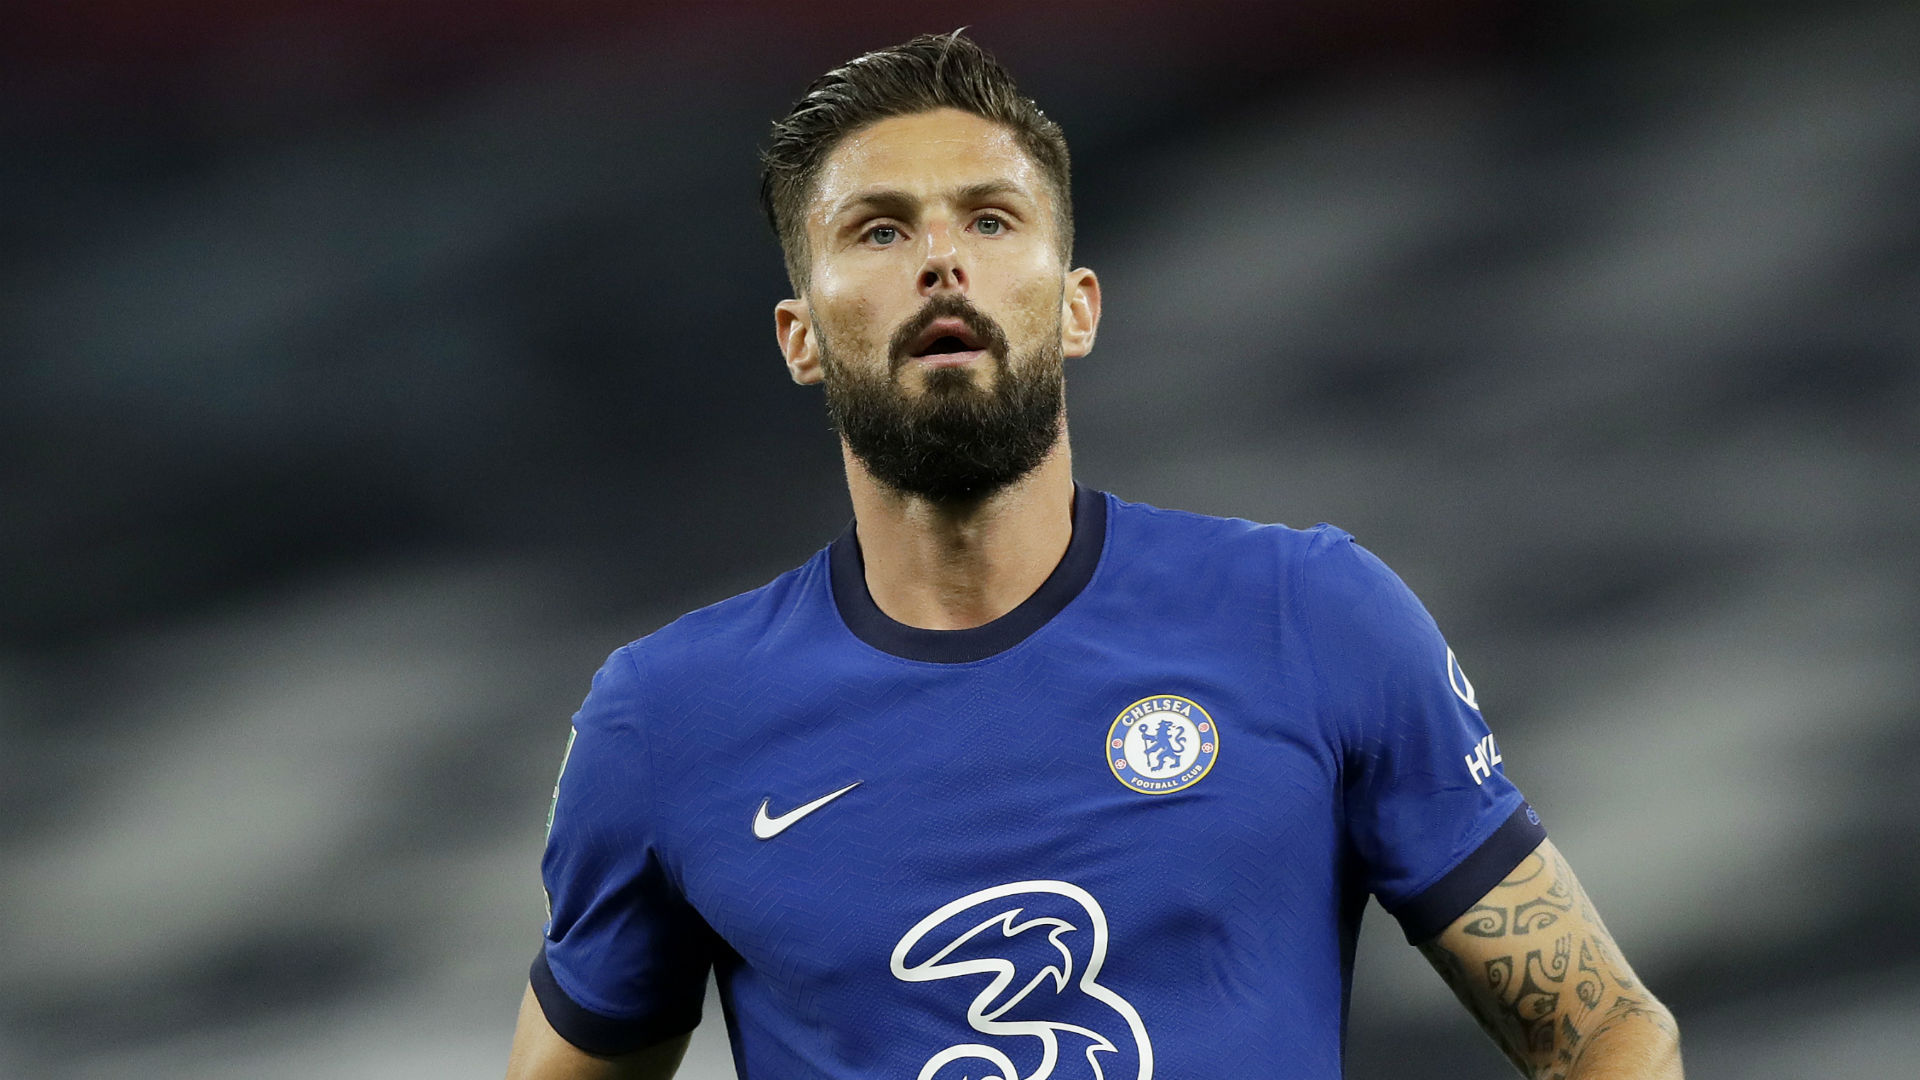 Chelsea tipped to hand Giroud new contract as Green expects January interest to be shunned